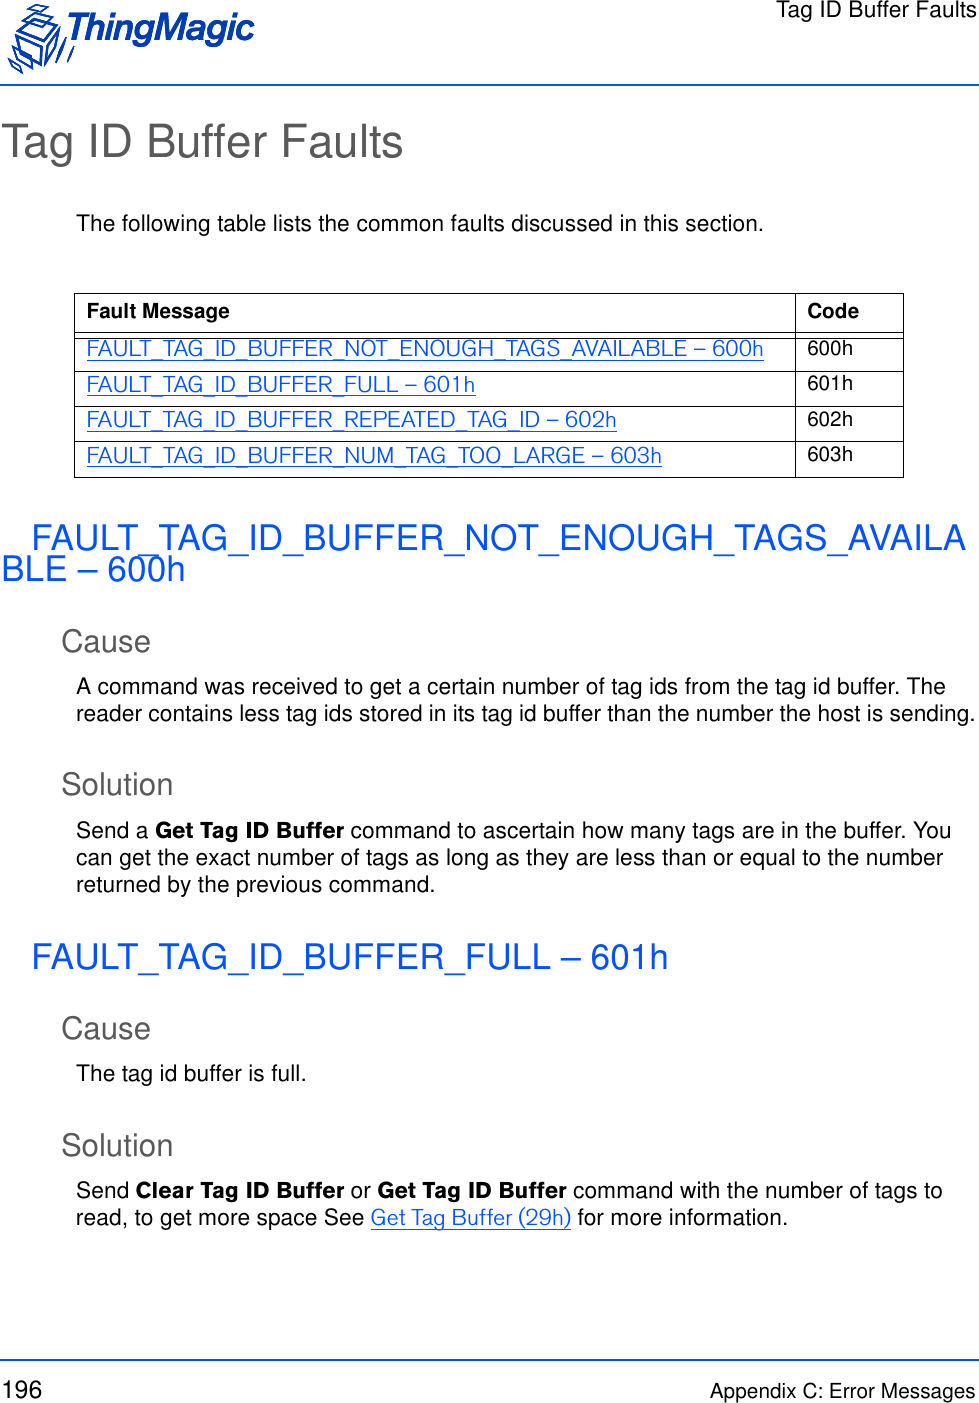 Tag ID Buffer Faults196 Appendix C: Error MessagesTag ID Buffer FaultsThe following table lists the common faults discussed in this section.FAULT_TAG_ID_BUFFER_NOT_ENOUGH_TAGS_AVAILABLE – 600hCauseA command was received to get a certain number of tag ids from the tag id buffer. The reader contains less tag ids stored in its tag id buffer than the number the host is sending.SolutionSend a Get Tag ID Buffer command to ascertain how many tags are in the buffer. You can get the exact number of tags as long as they are less than or equal to the number returned by the previous command.FAULT_TAG_ID_BUFFER_FULL – 601hCauseThe tag id buffer is full.SolutionSend Clear Tag ID Buffer or Get Tag ID Buffer command with the number of tags to read, to get more space See Get Tag Buffer (29h) for more information.Fault Message CodeFAULT_TAG_ID_BUFFER_NOT_ENOUGH_TAGS_AVAILABLE – 600h 600hFAULT_TAG_ID_BUFFER_FULL – 601h 601hFAULT_TAG_ID_BUFFER_REPEATED_TAG_ID – 602h 602hFAULT_TAG_ID_BUFFER_NUM_TAG_TOO_LARGE – 603h 603h